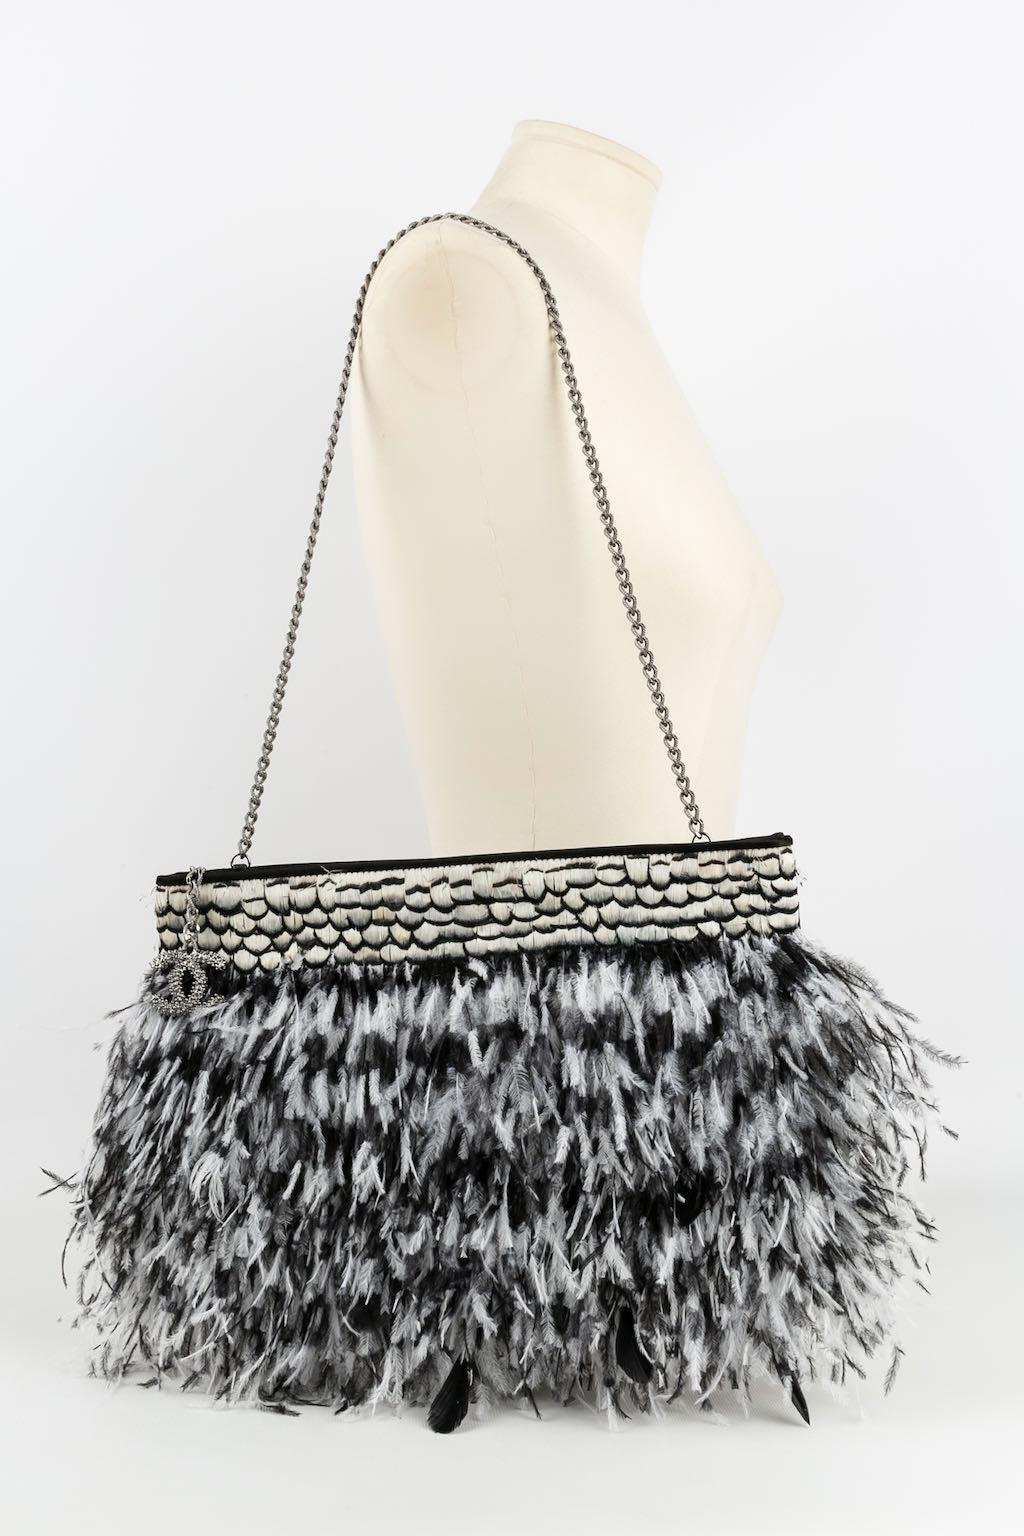 Chanel Clutch Silk Bag in Black and White Feathers, 2011 In Excellent Condition For Sale In SAINT-OUEN-SUR-SEINE, FR